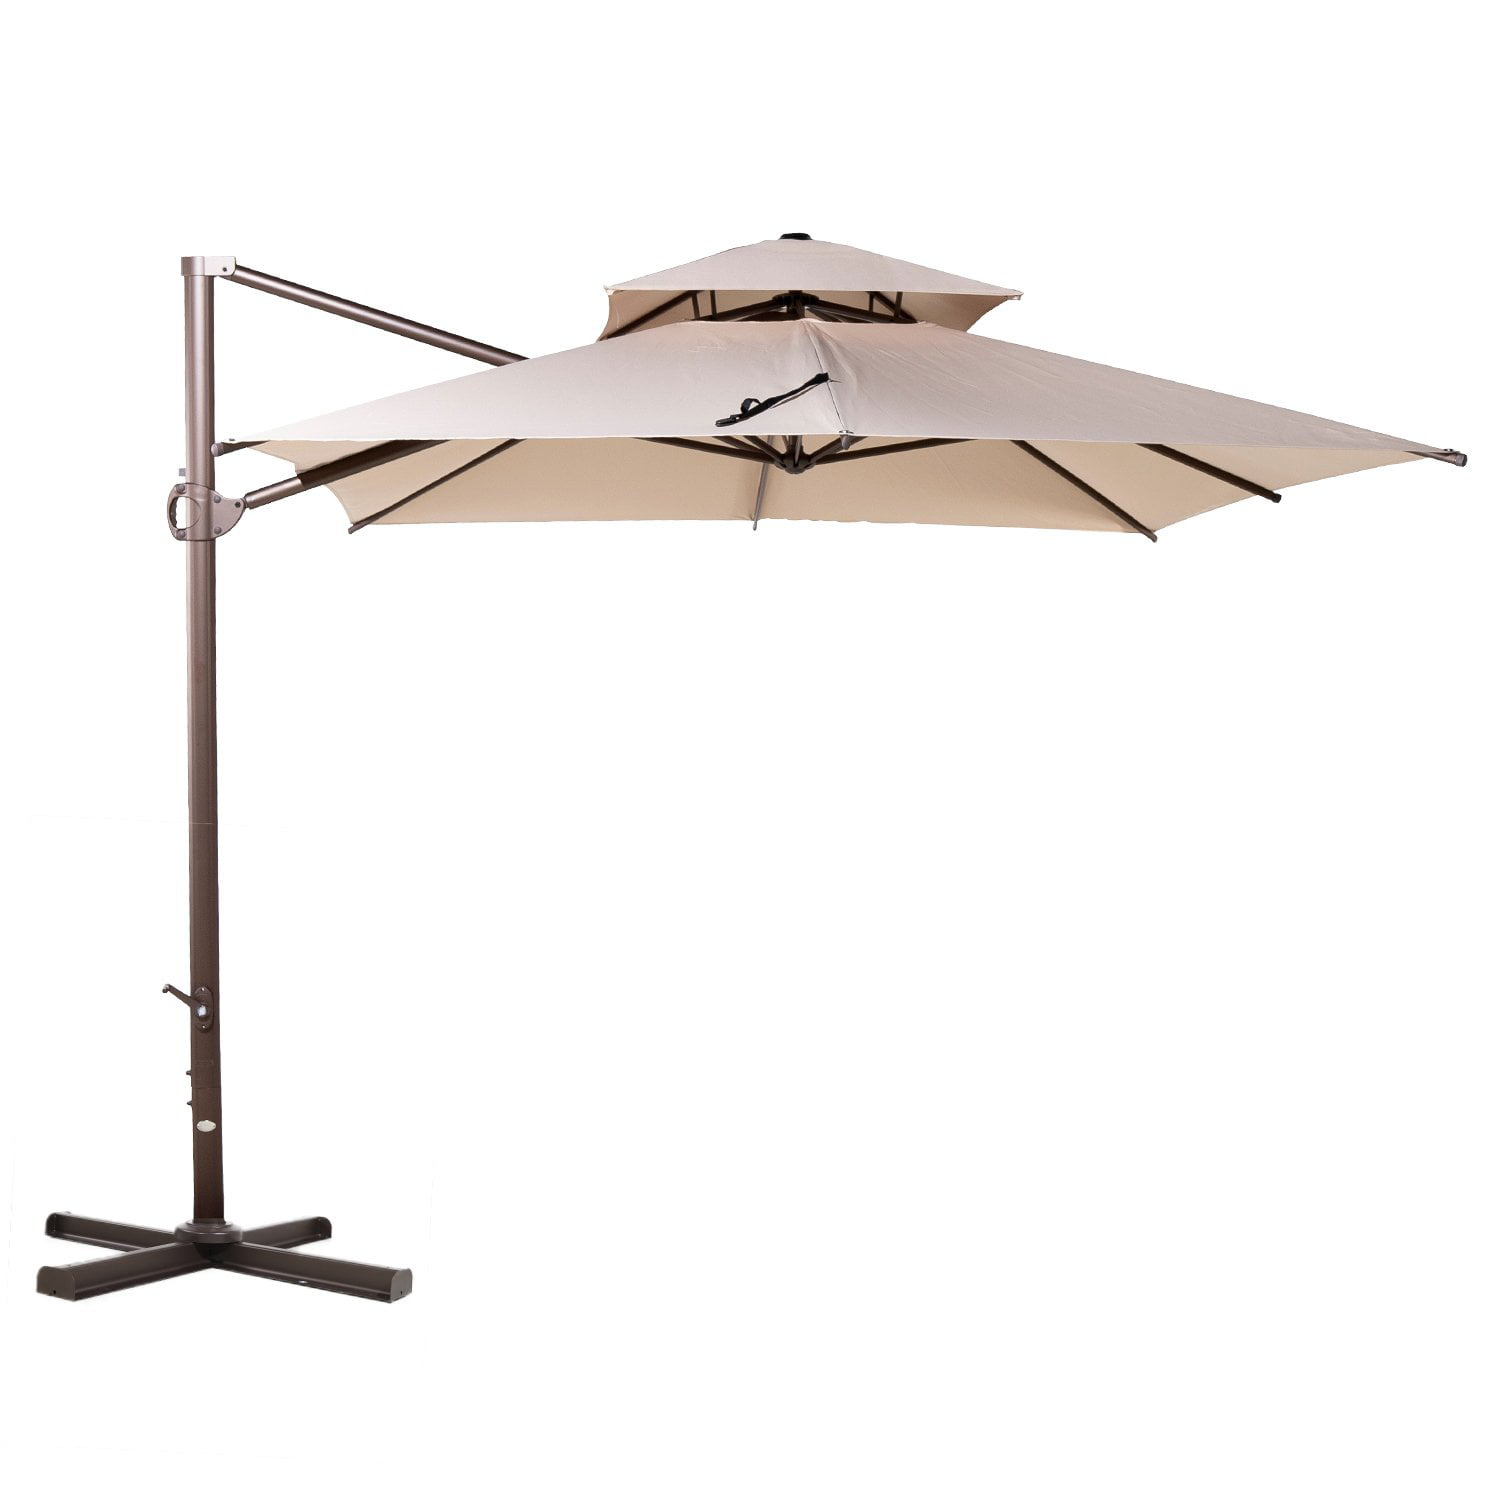 Monkey Patio 12 Ft By 9 Ft Rectangular Cantilever Patio Umbrella With